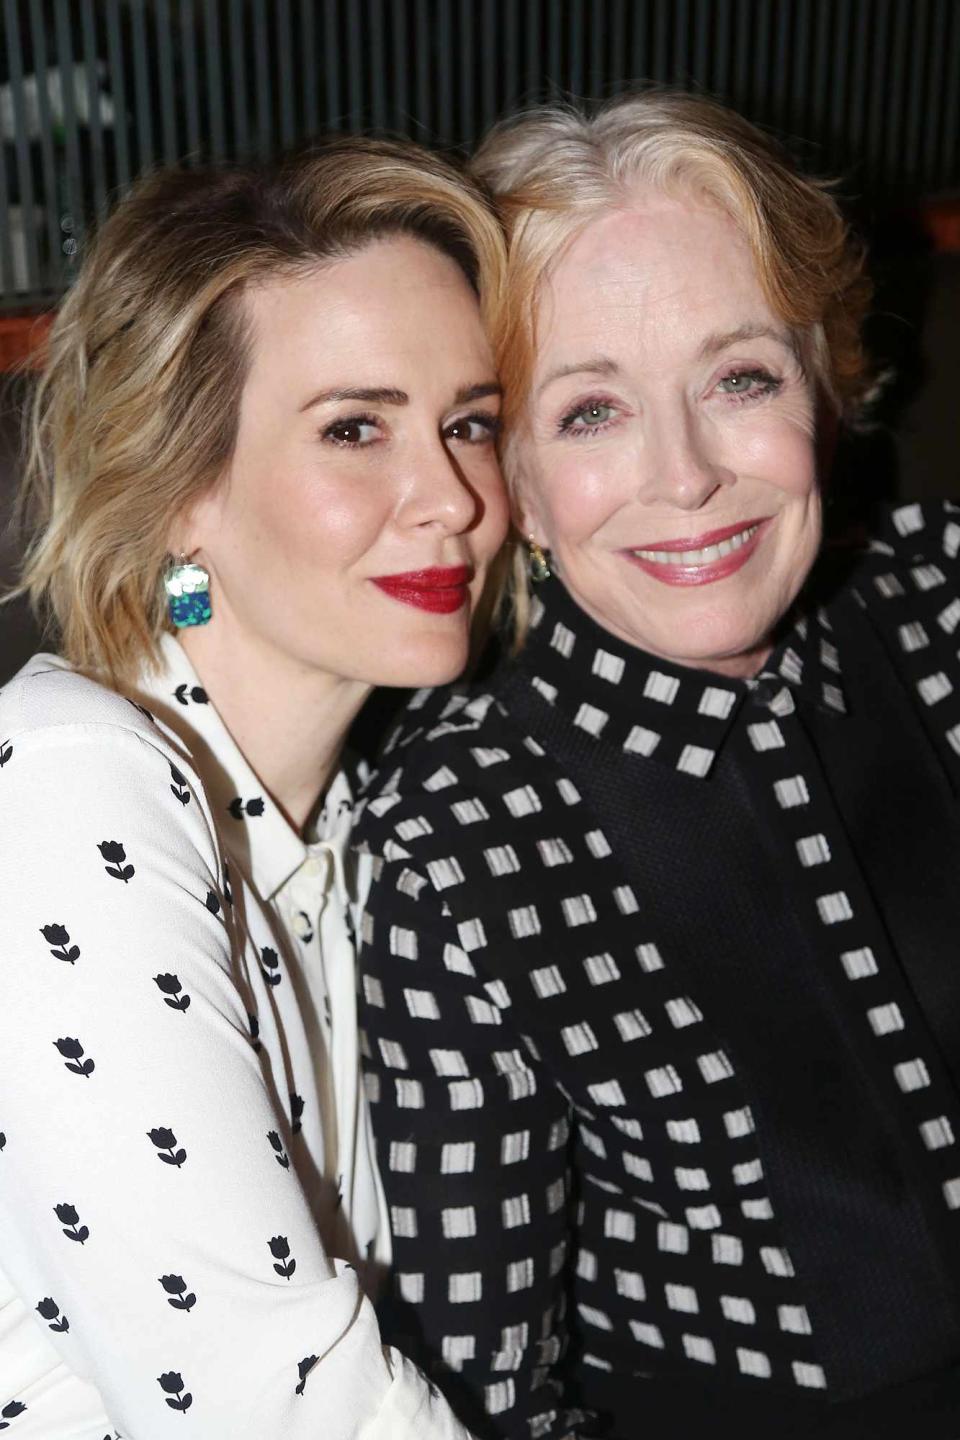 Sarah Paulson and Holland Taylor pose at the Opening Night After-party for "Ripcord" at The Brasserie 8 and 1/2 on October 20, 2015 in New York City